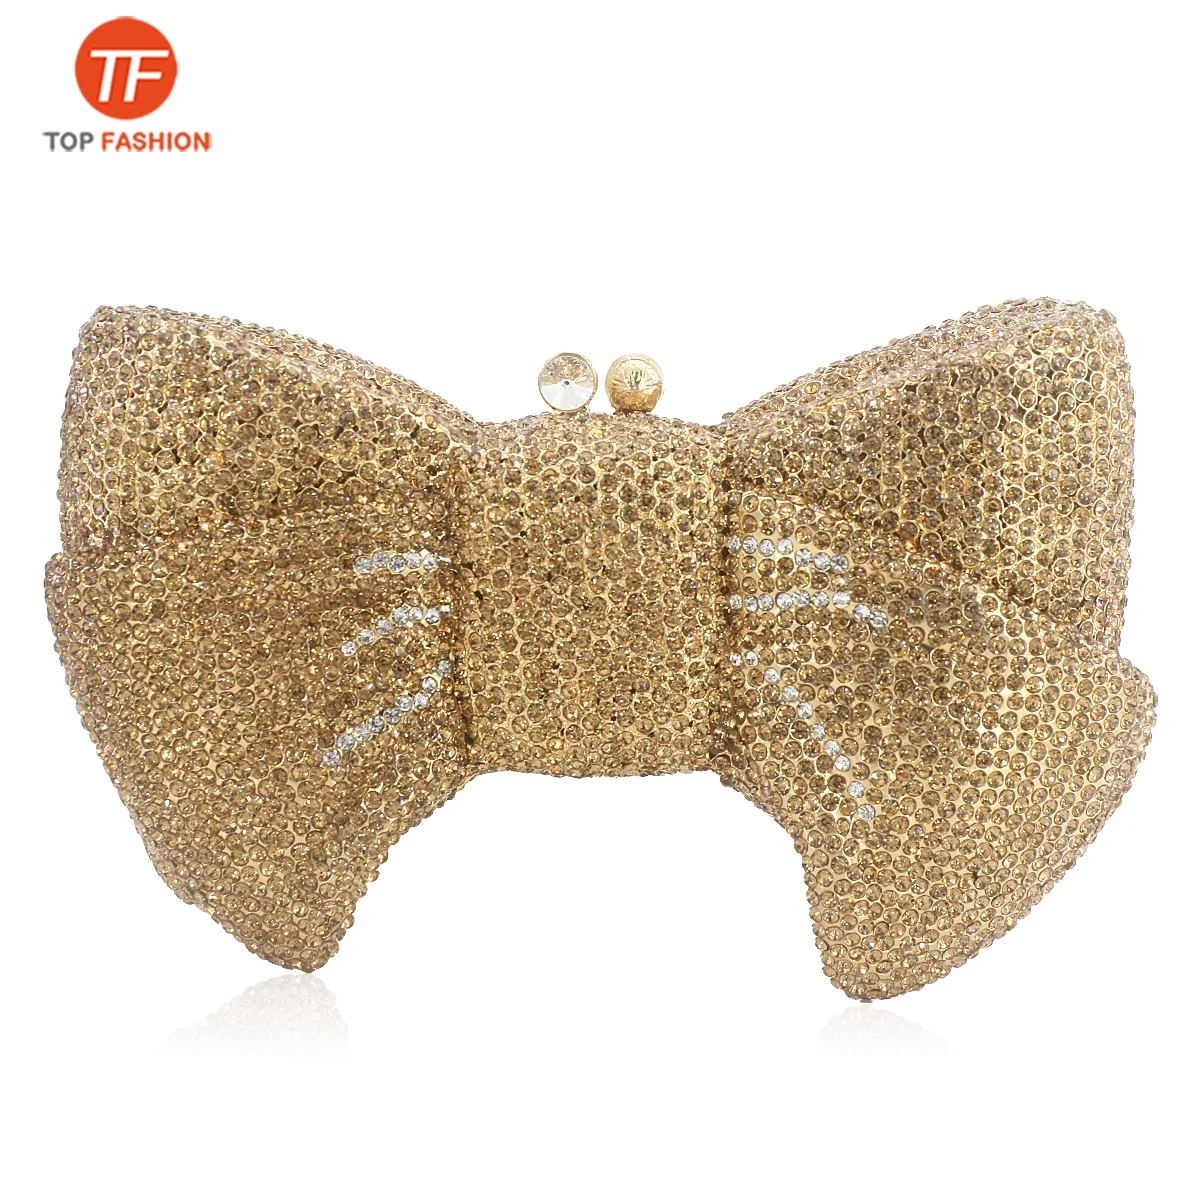 

Factory Wholesales 2021 Crystal Rhinestone Bow Clutch Bag for Formal Party Evening Handbag Jewel Box Minaudere, ( accept customized )